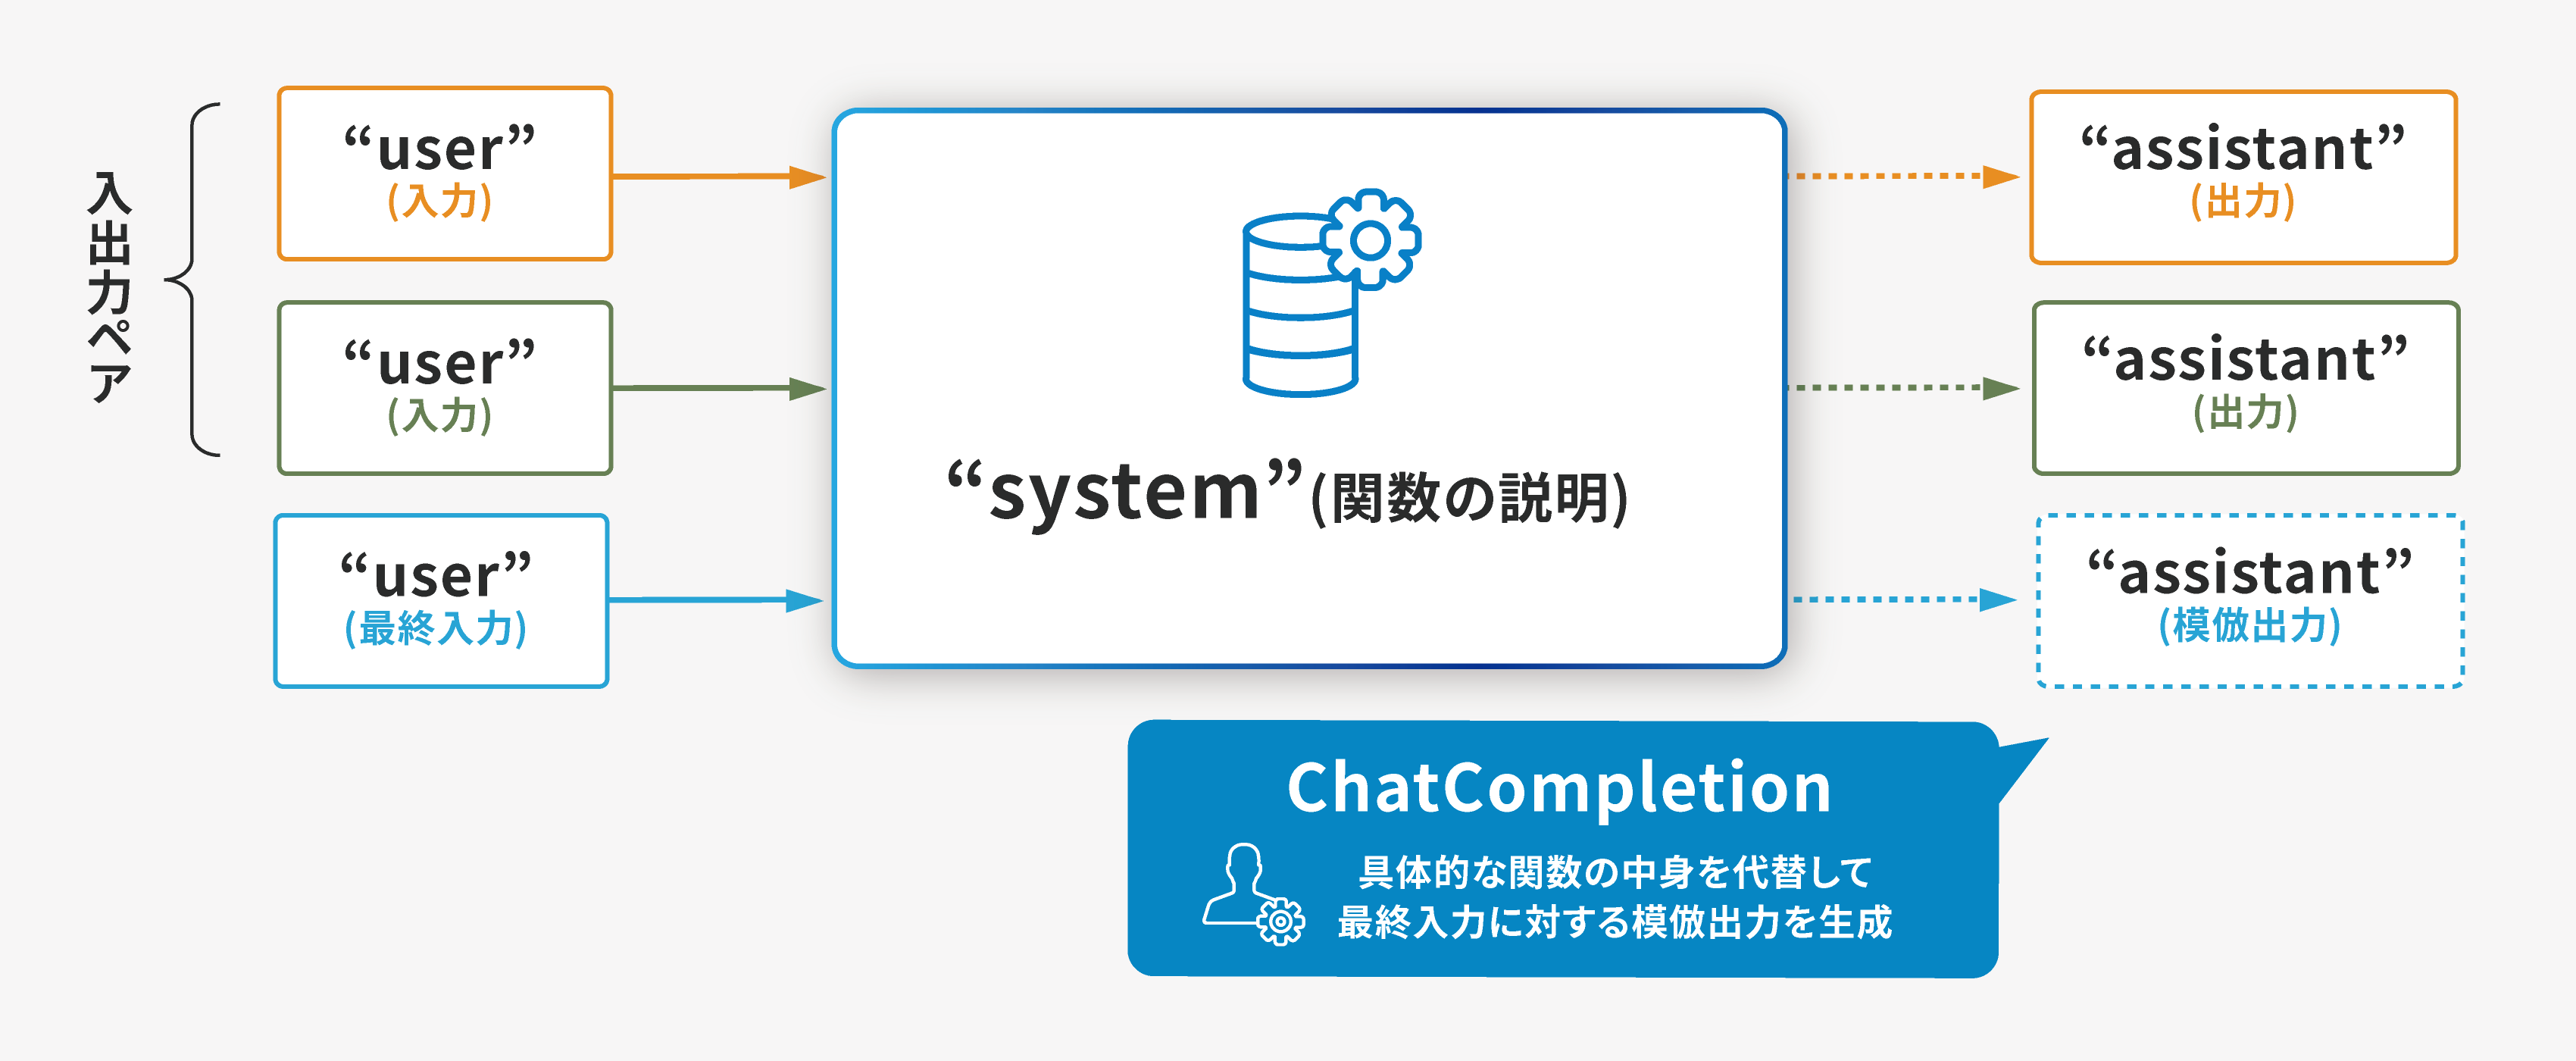 functional_ChatCompletion